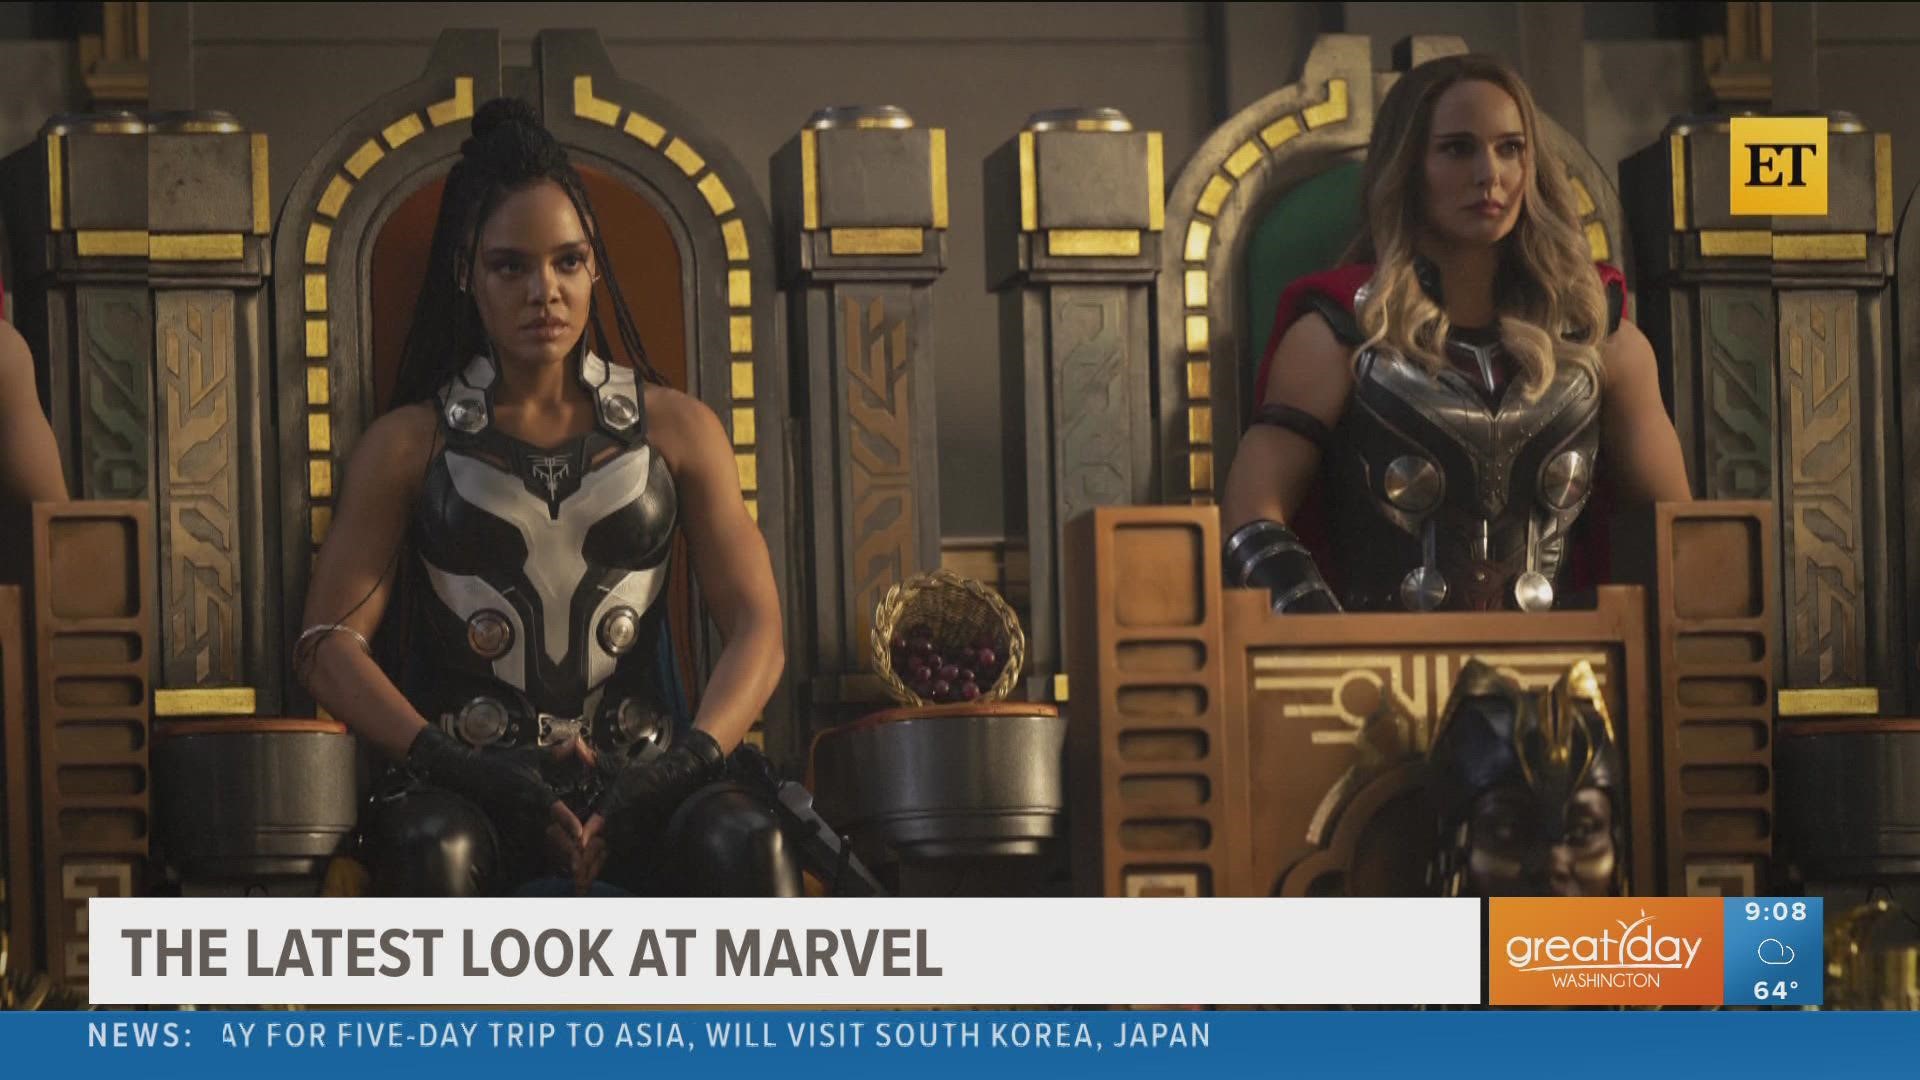 ET's Nischelle Turner gives Kristen and Ellen an update on Loki, Thor and a new hero in the Marvel Universe. Watch ET on WUSA9 weeknights at 7:30pm.